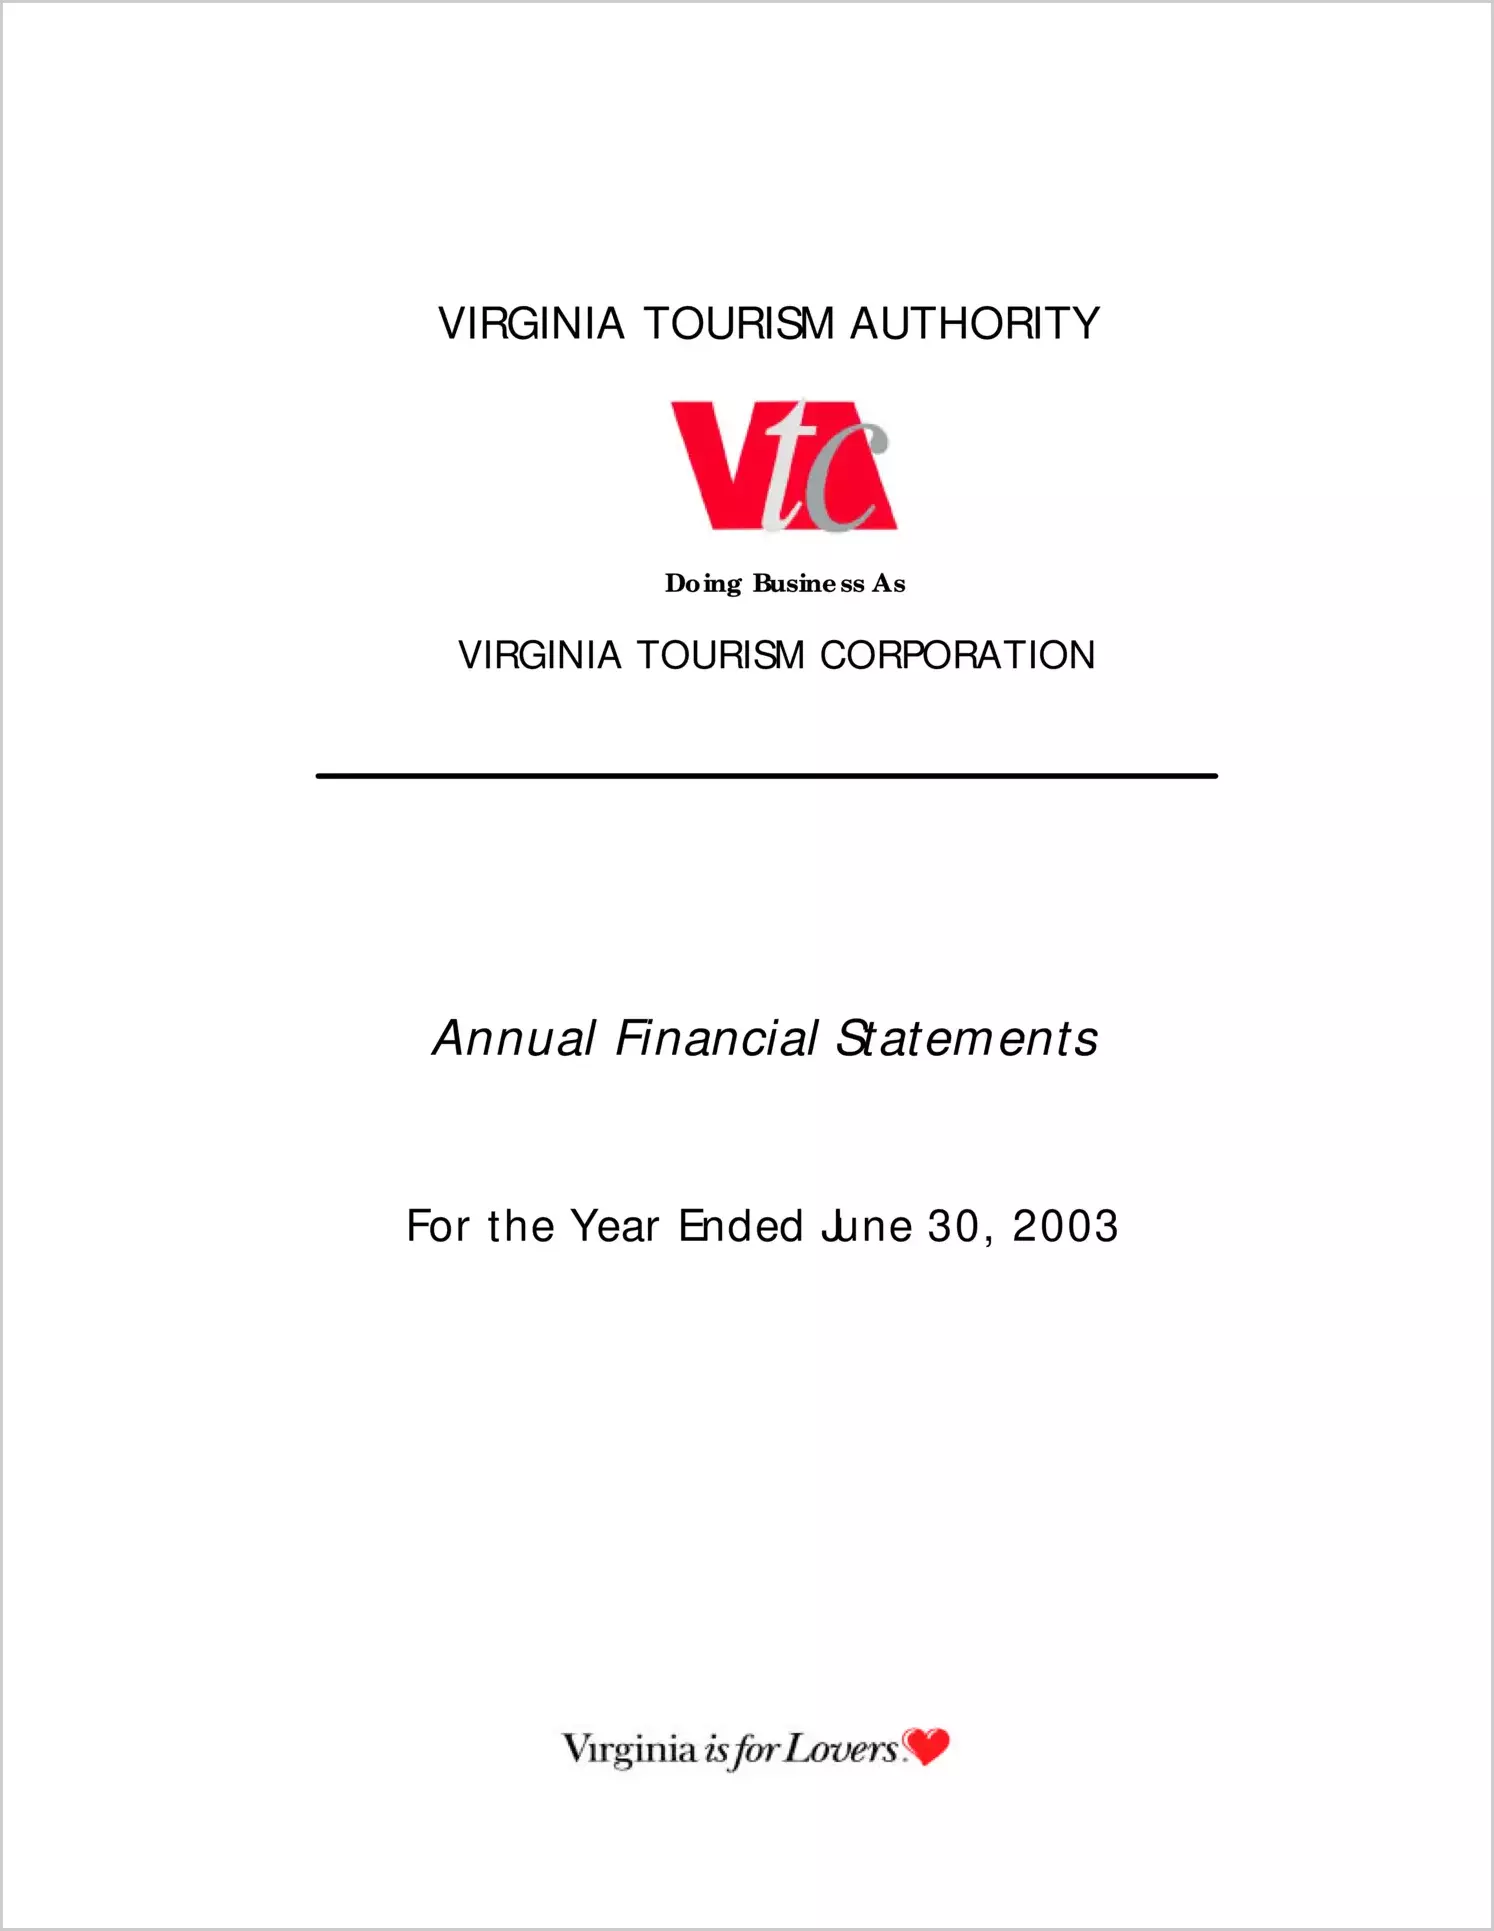 Virginia Tourism Authority for the year ended June 30, 2003